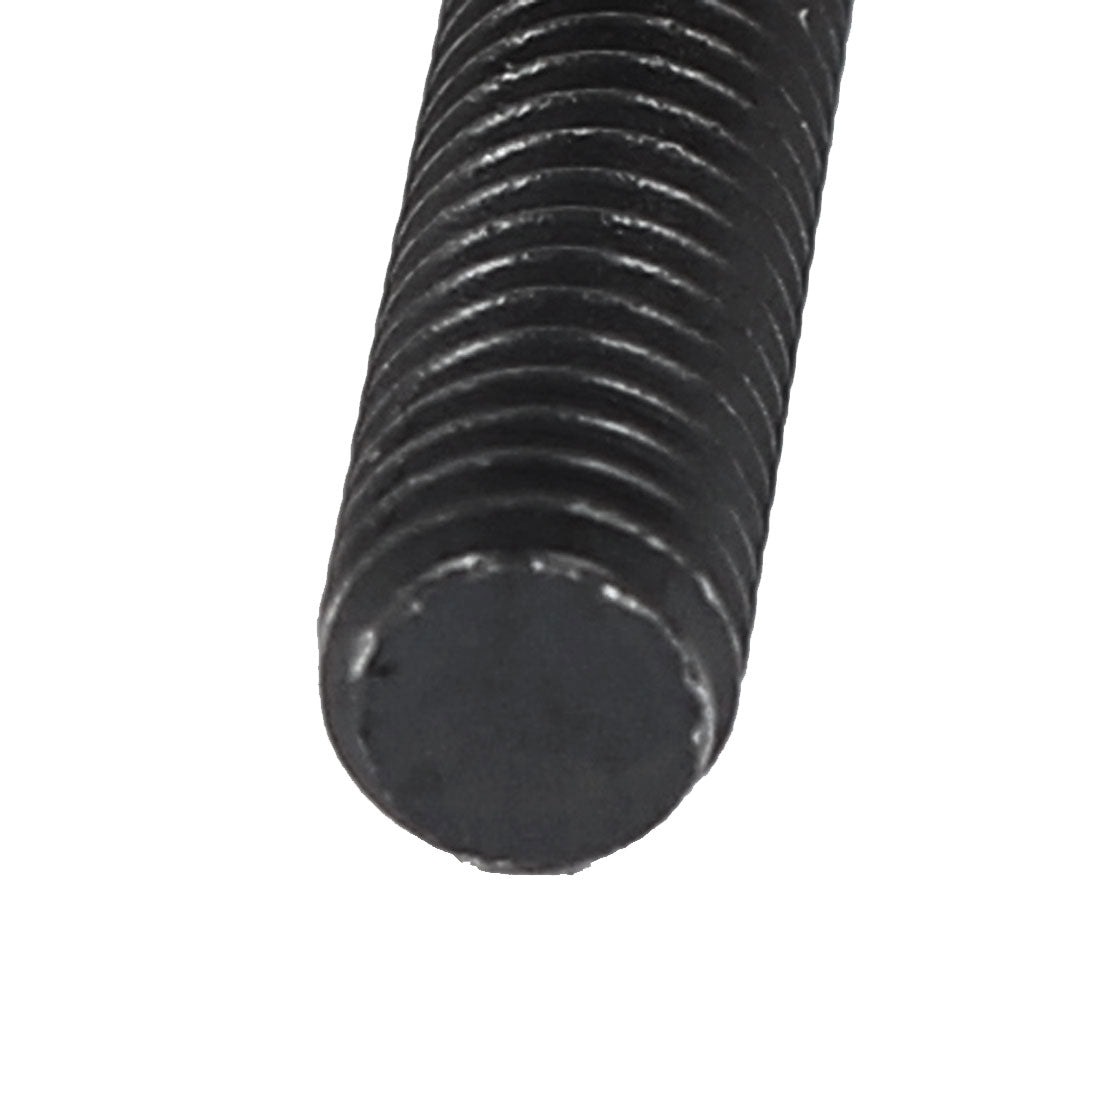 Uxcell Uxcell M6x45mm 12.9 Alloy Steel Hex Socket Screws Partially Threaded Bolts Black 10Pcs